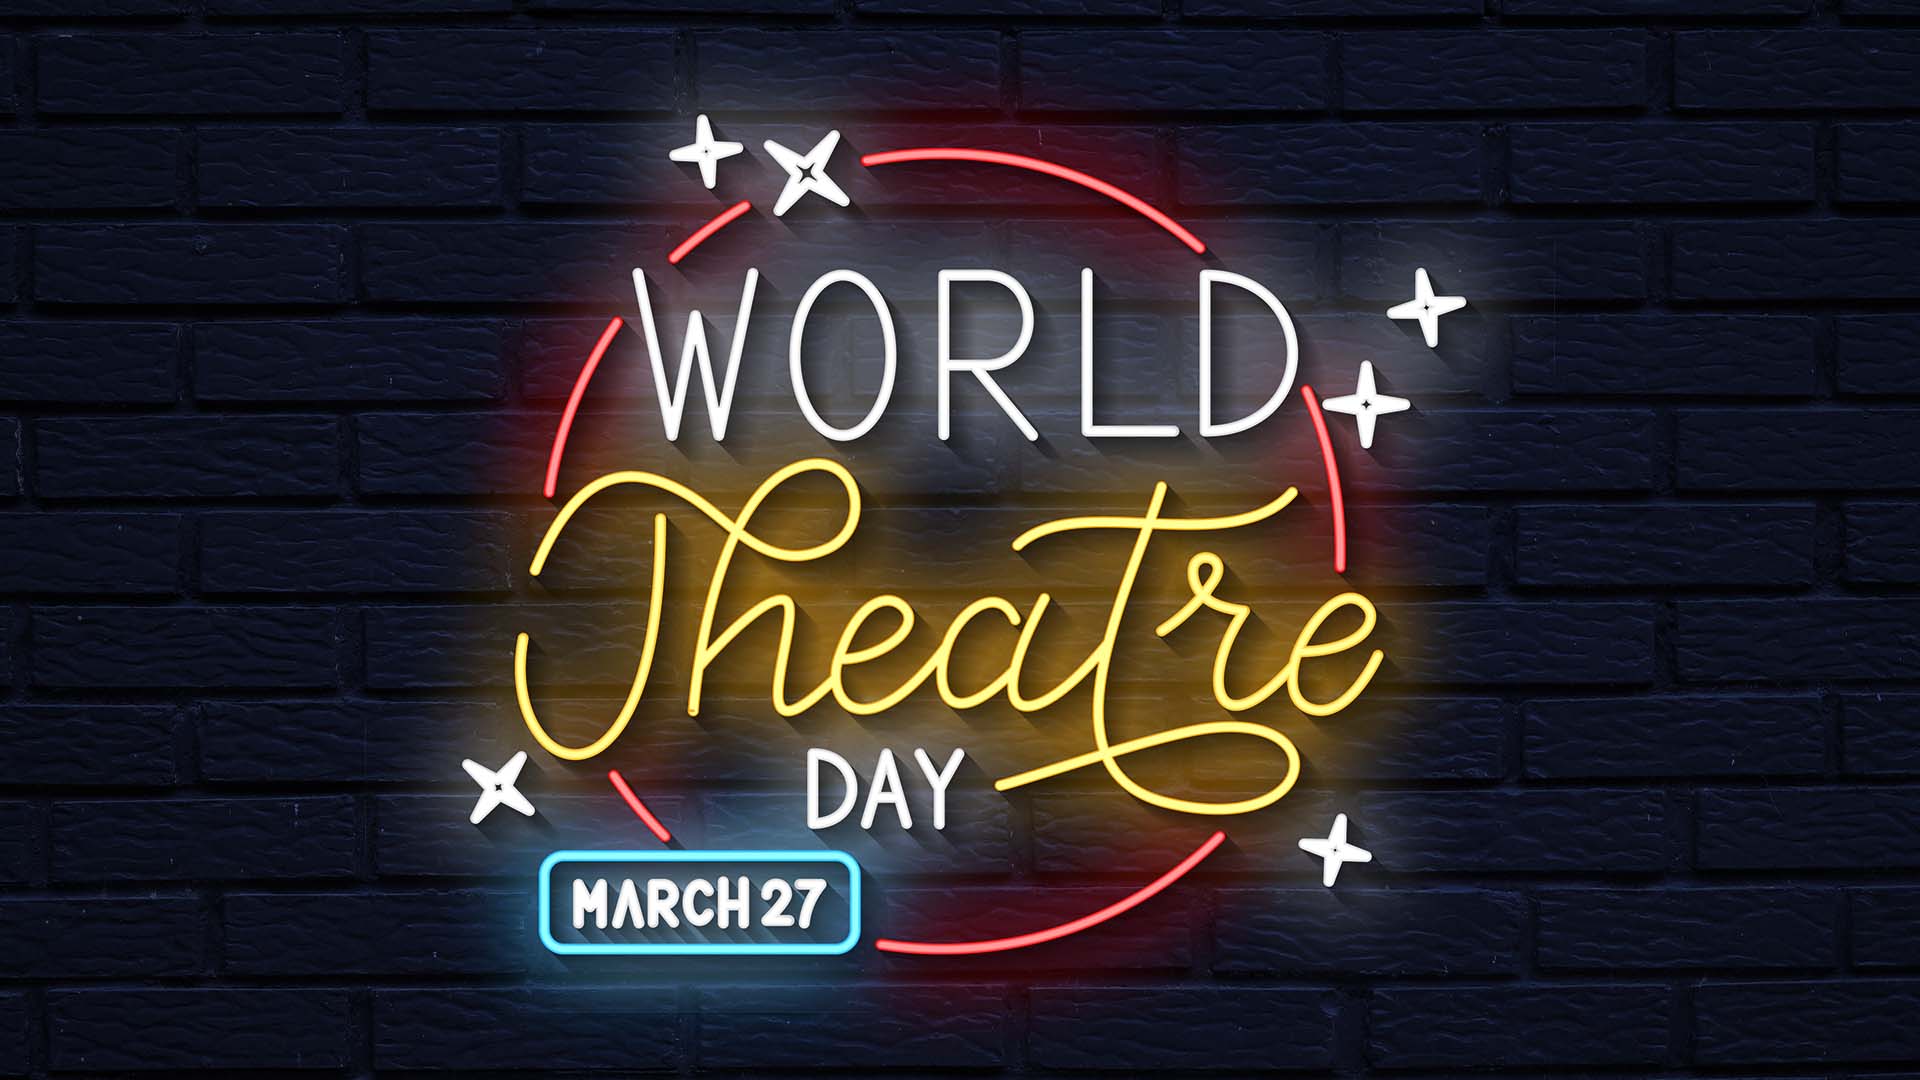 black brick background with a neon sign spelling out "World Theater Day March 27"